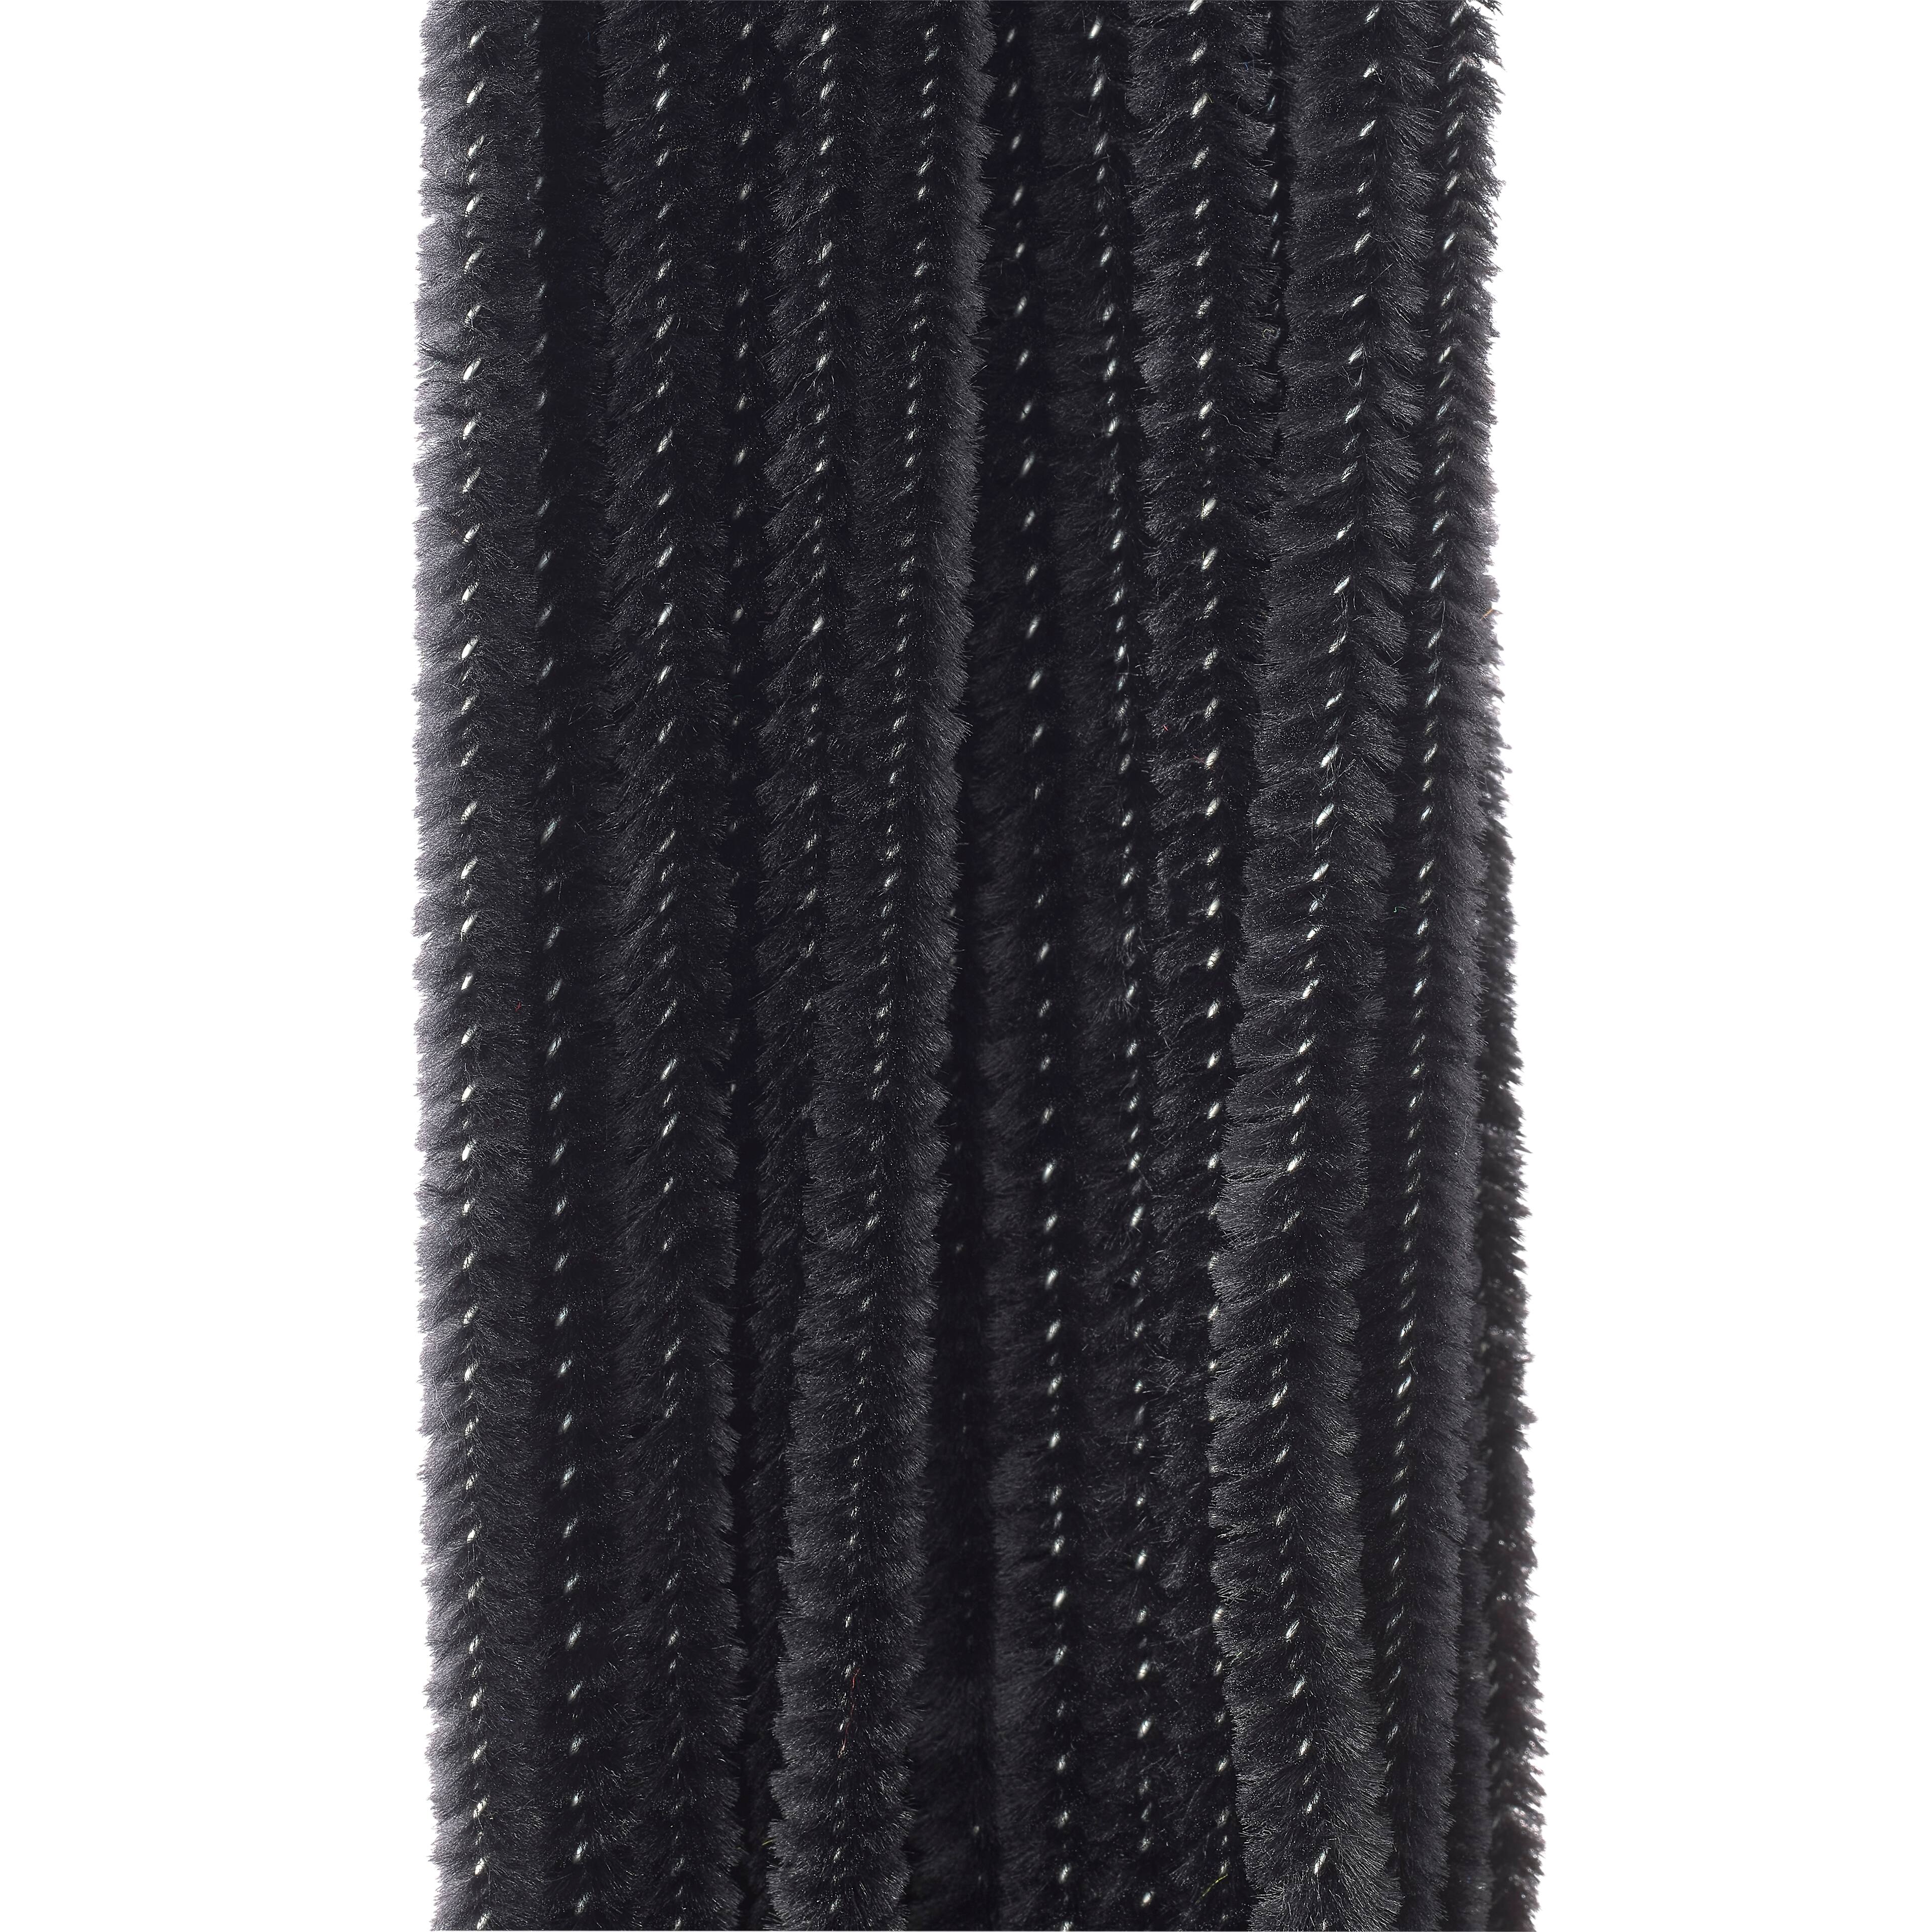 12 Packs: 350 Ct. (4,200 Total) Black Chenille Pipe Cleaners by Creatology, Size: 6